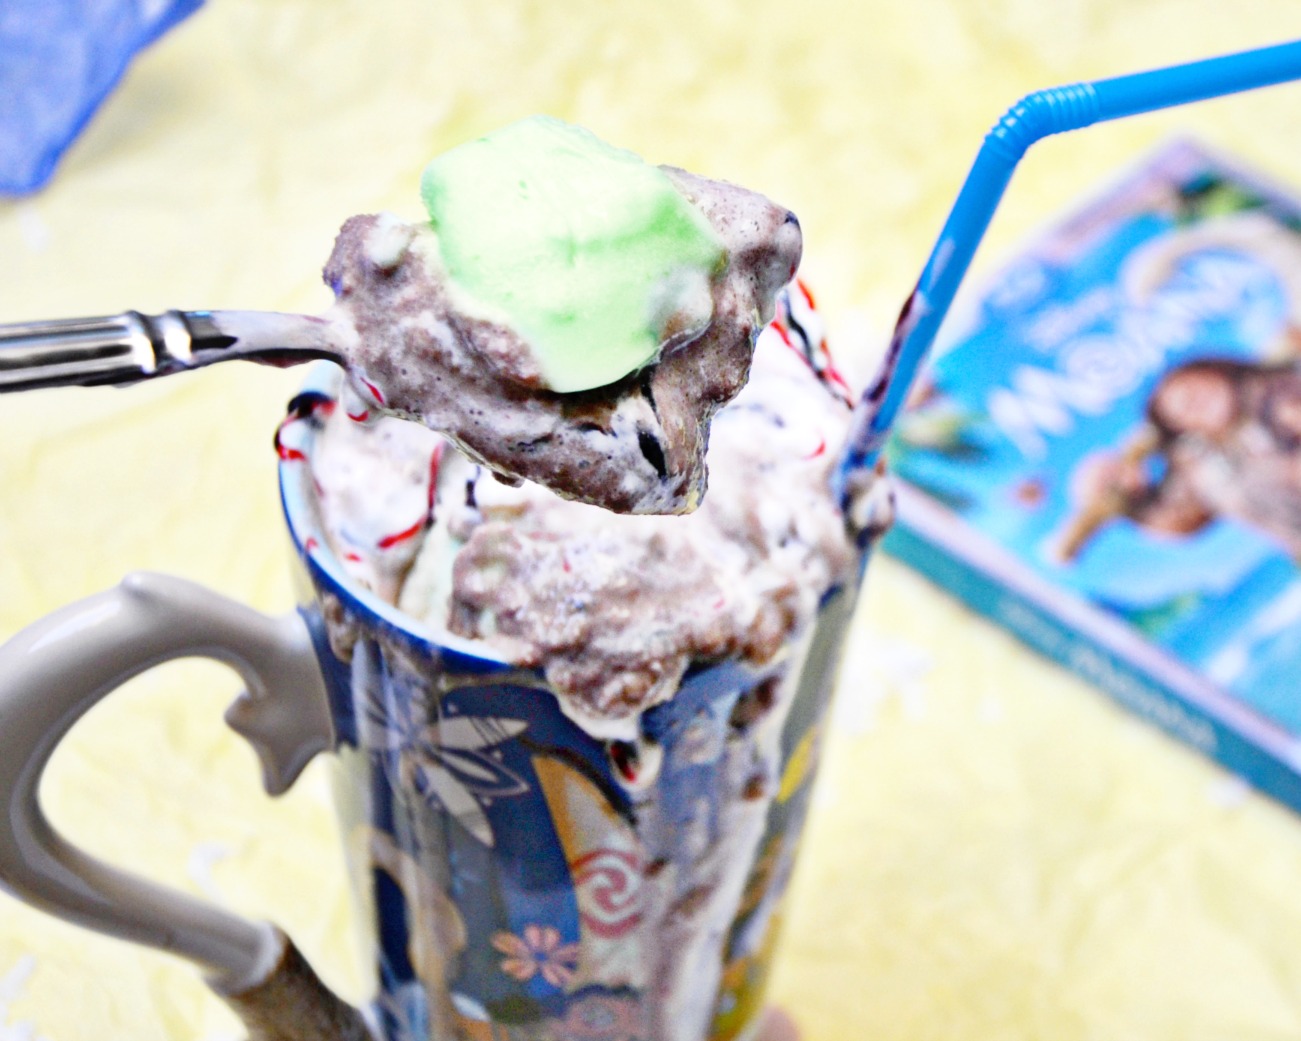 Celebrate the release of Moana with a family movie night and this yummy Moana Heart of Te Fiti shake recipe.